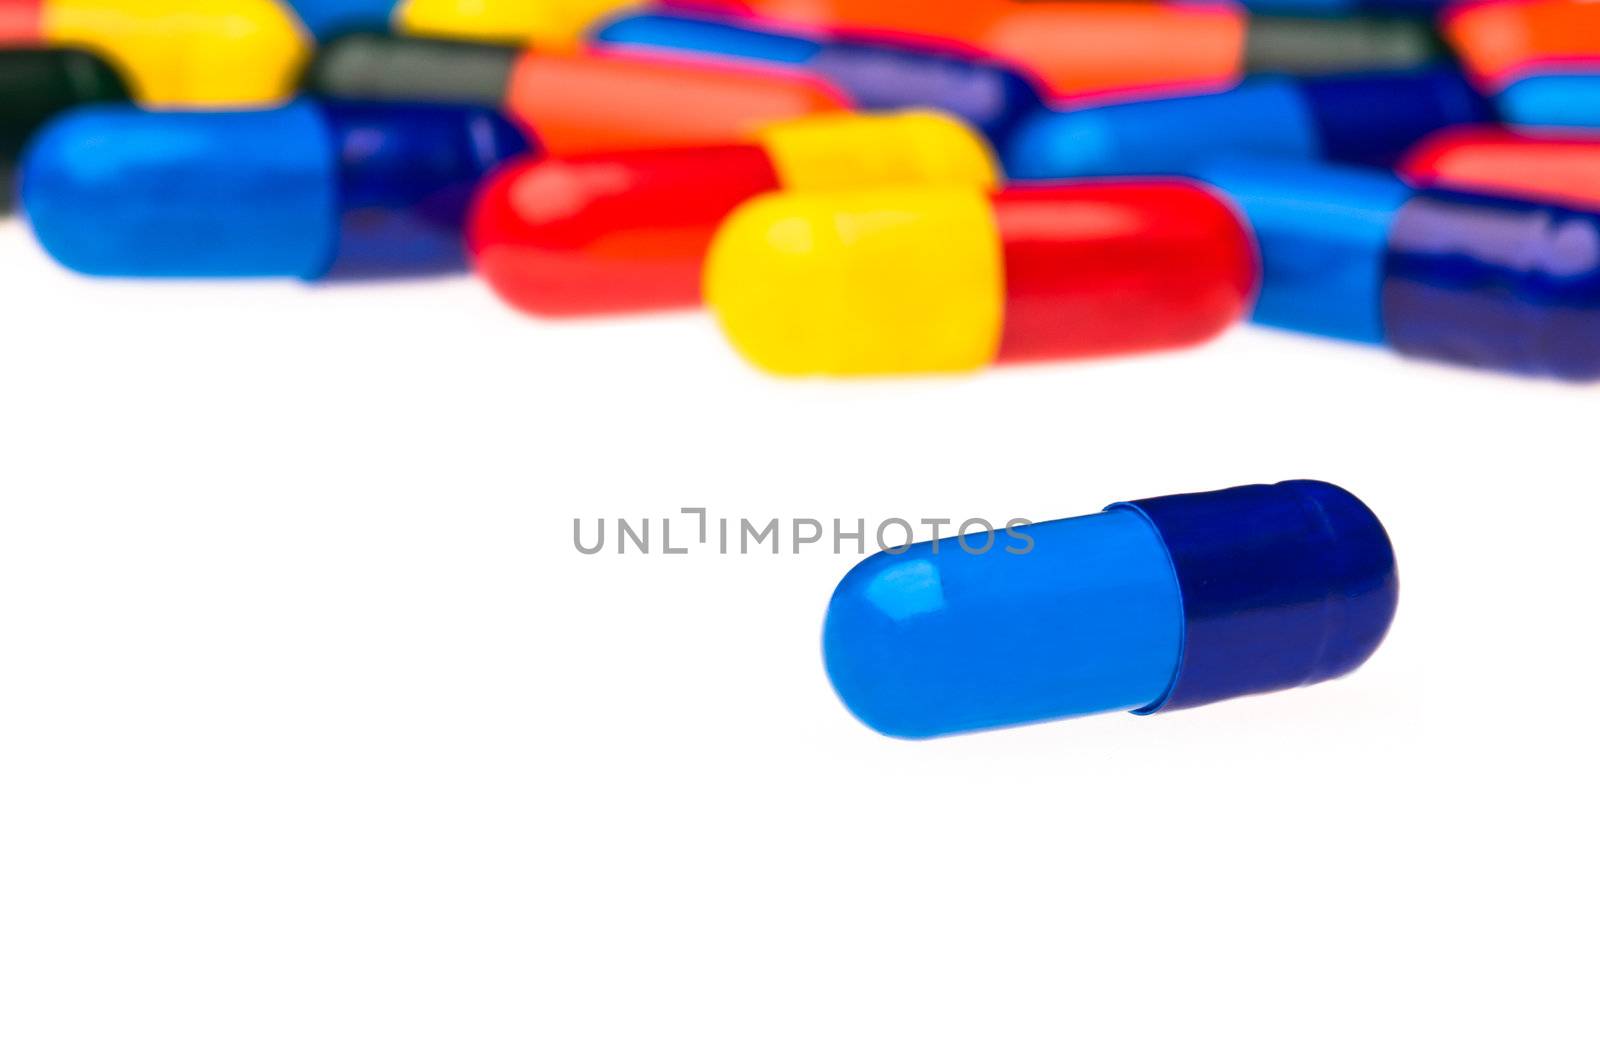 One blue capsule in front of many colorful, blurry in the background